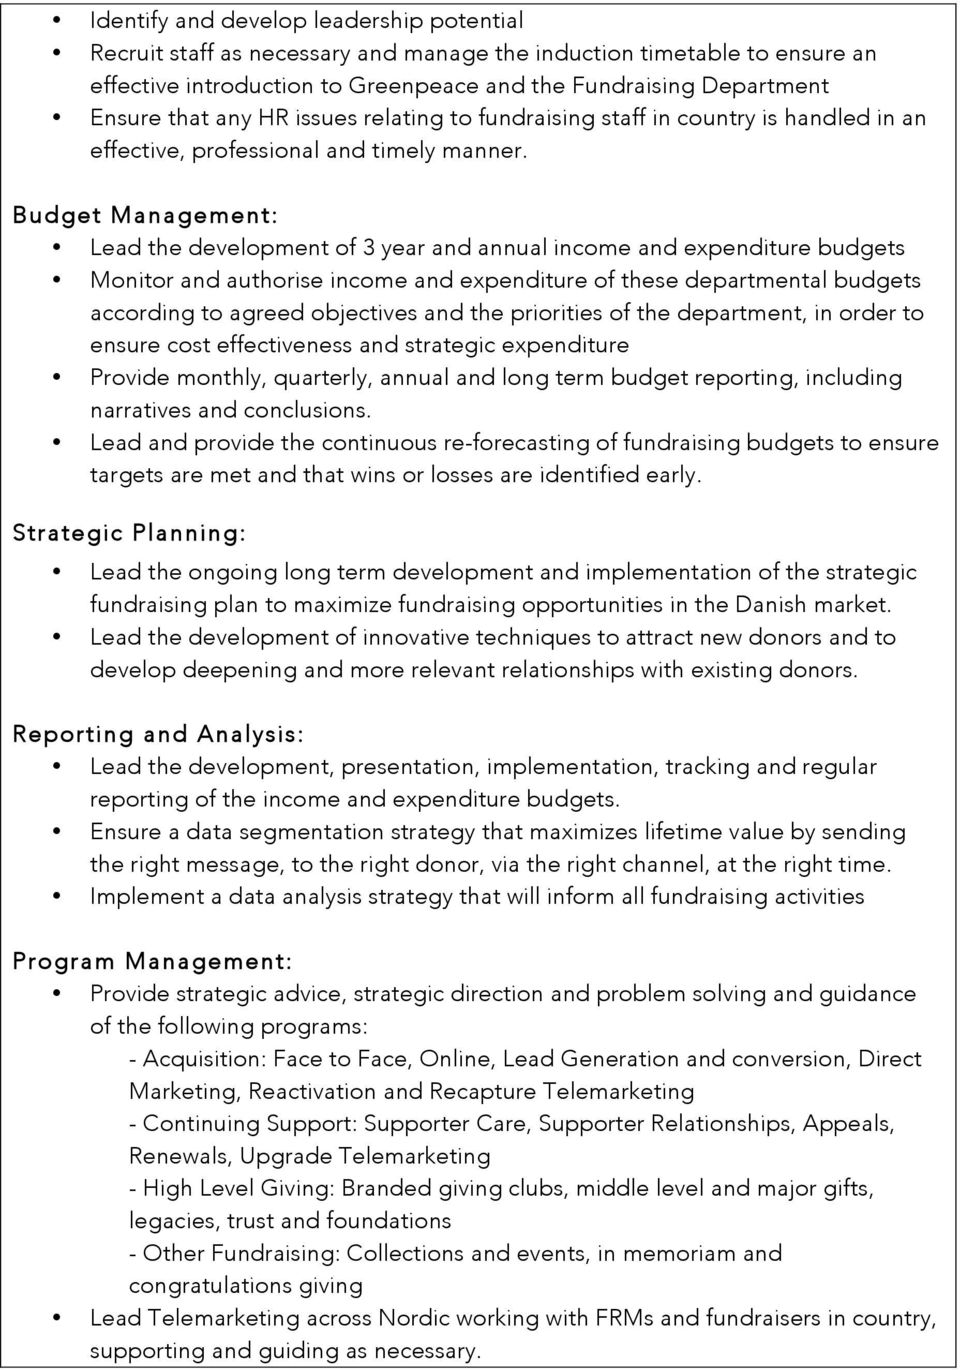 Budget Management: Lead the development of 3 year and annual income and expenditure budgets Monitor and authorise income and expenditure of these departmental budgets according to agreed objectives